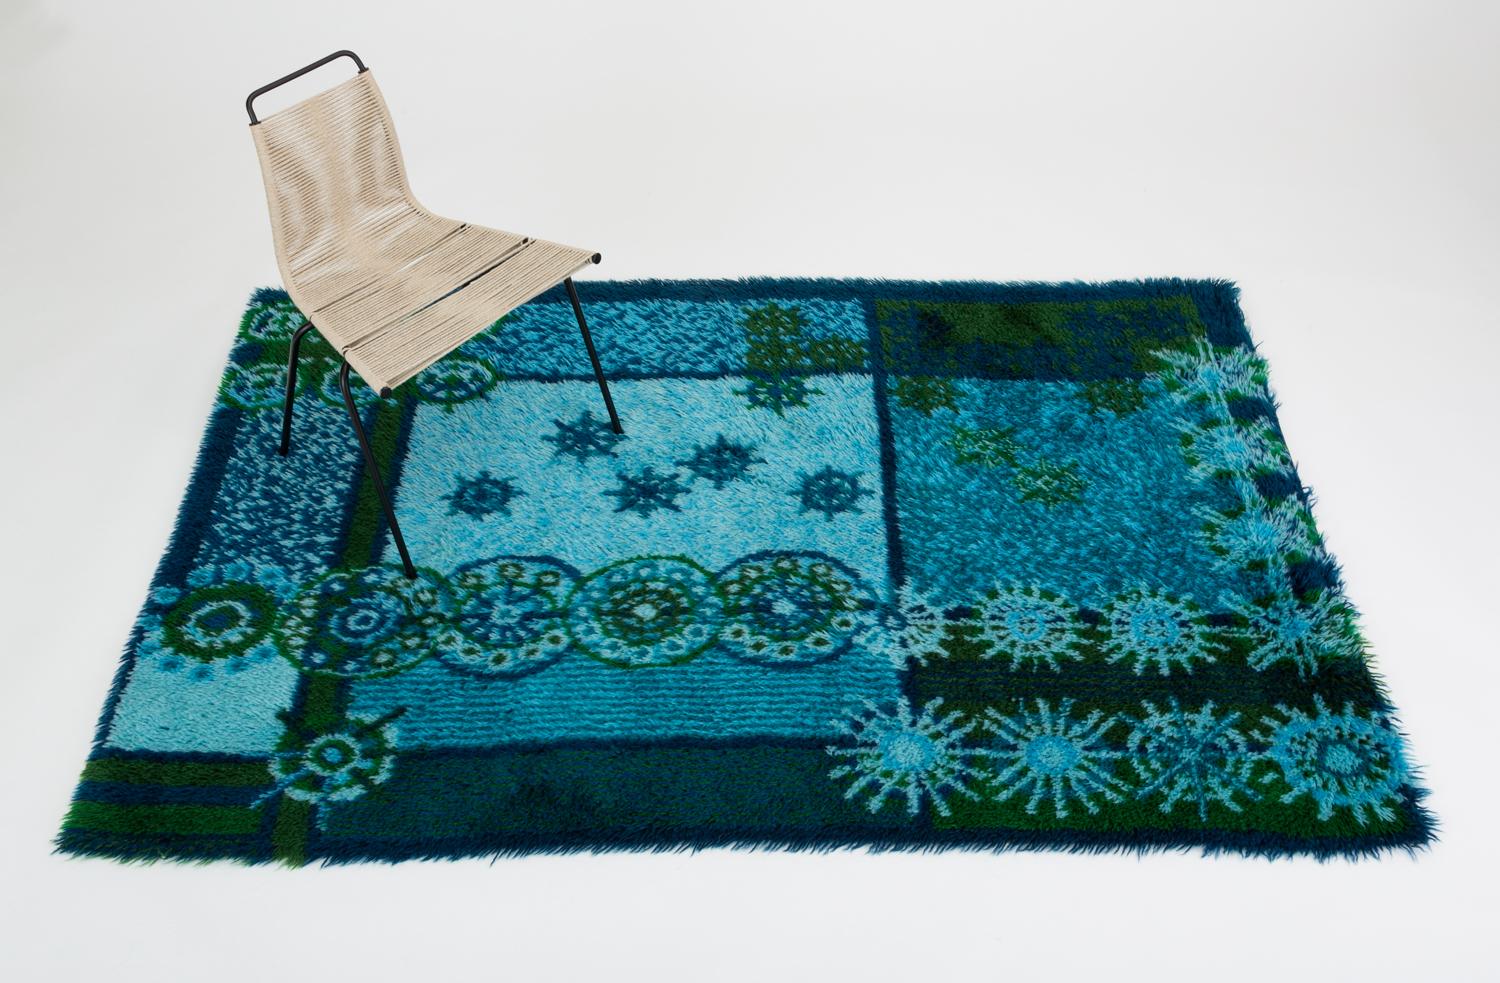 A 1960s Danish shag rug by Ege Rya in cool, blue tones. Woven according to tradition, this carpet has a one-inch pile and a design motif of intricately patterned circles, reminiscent of snowflakes against a windowpane background. The company